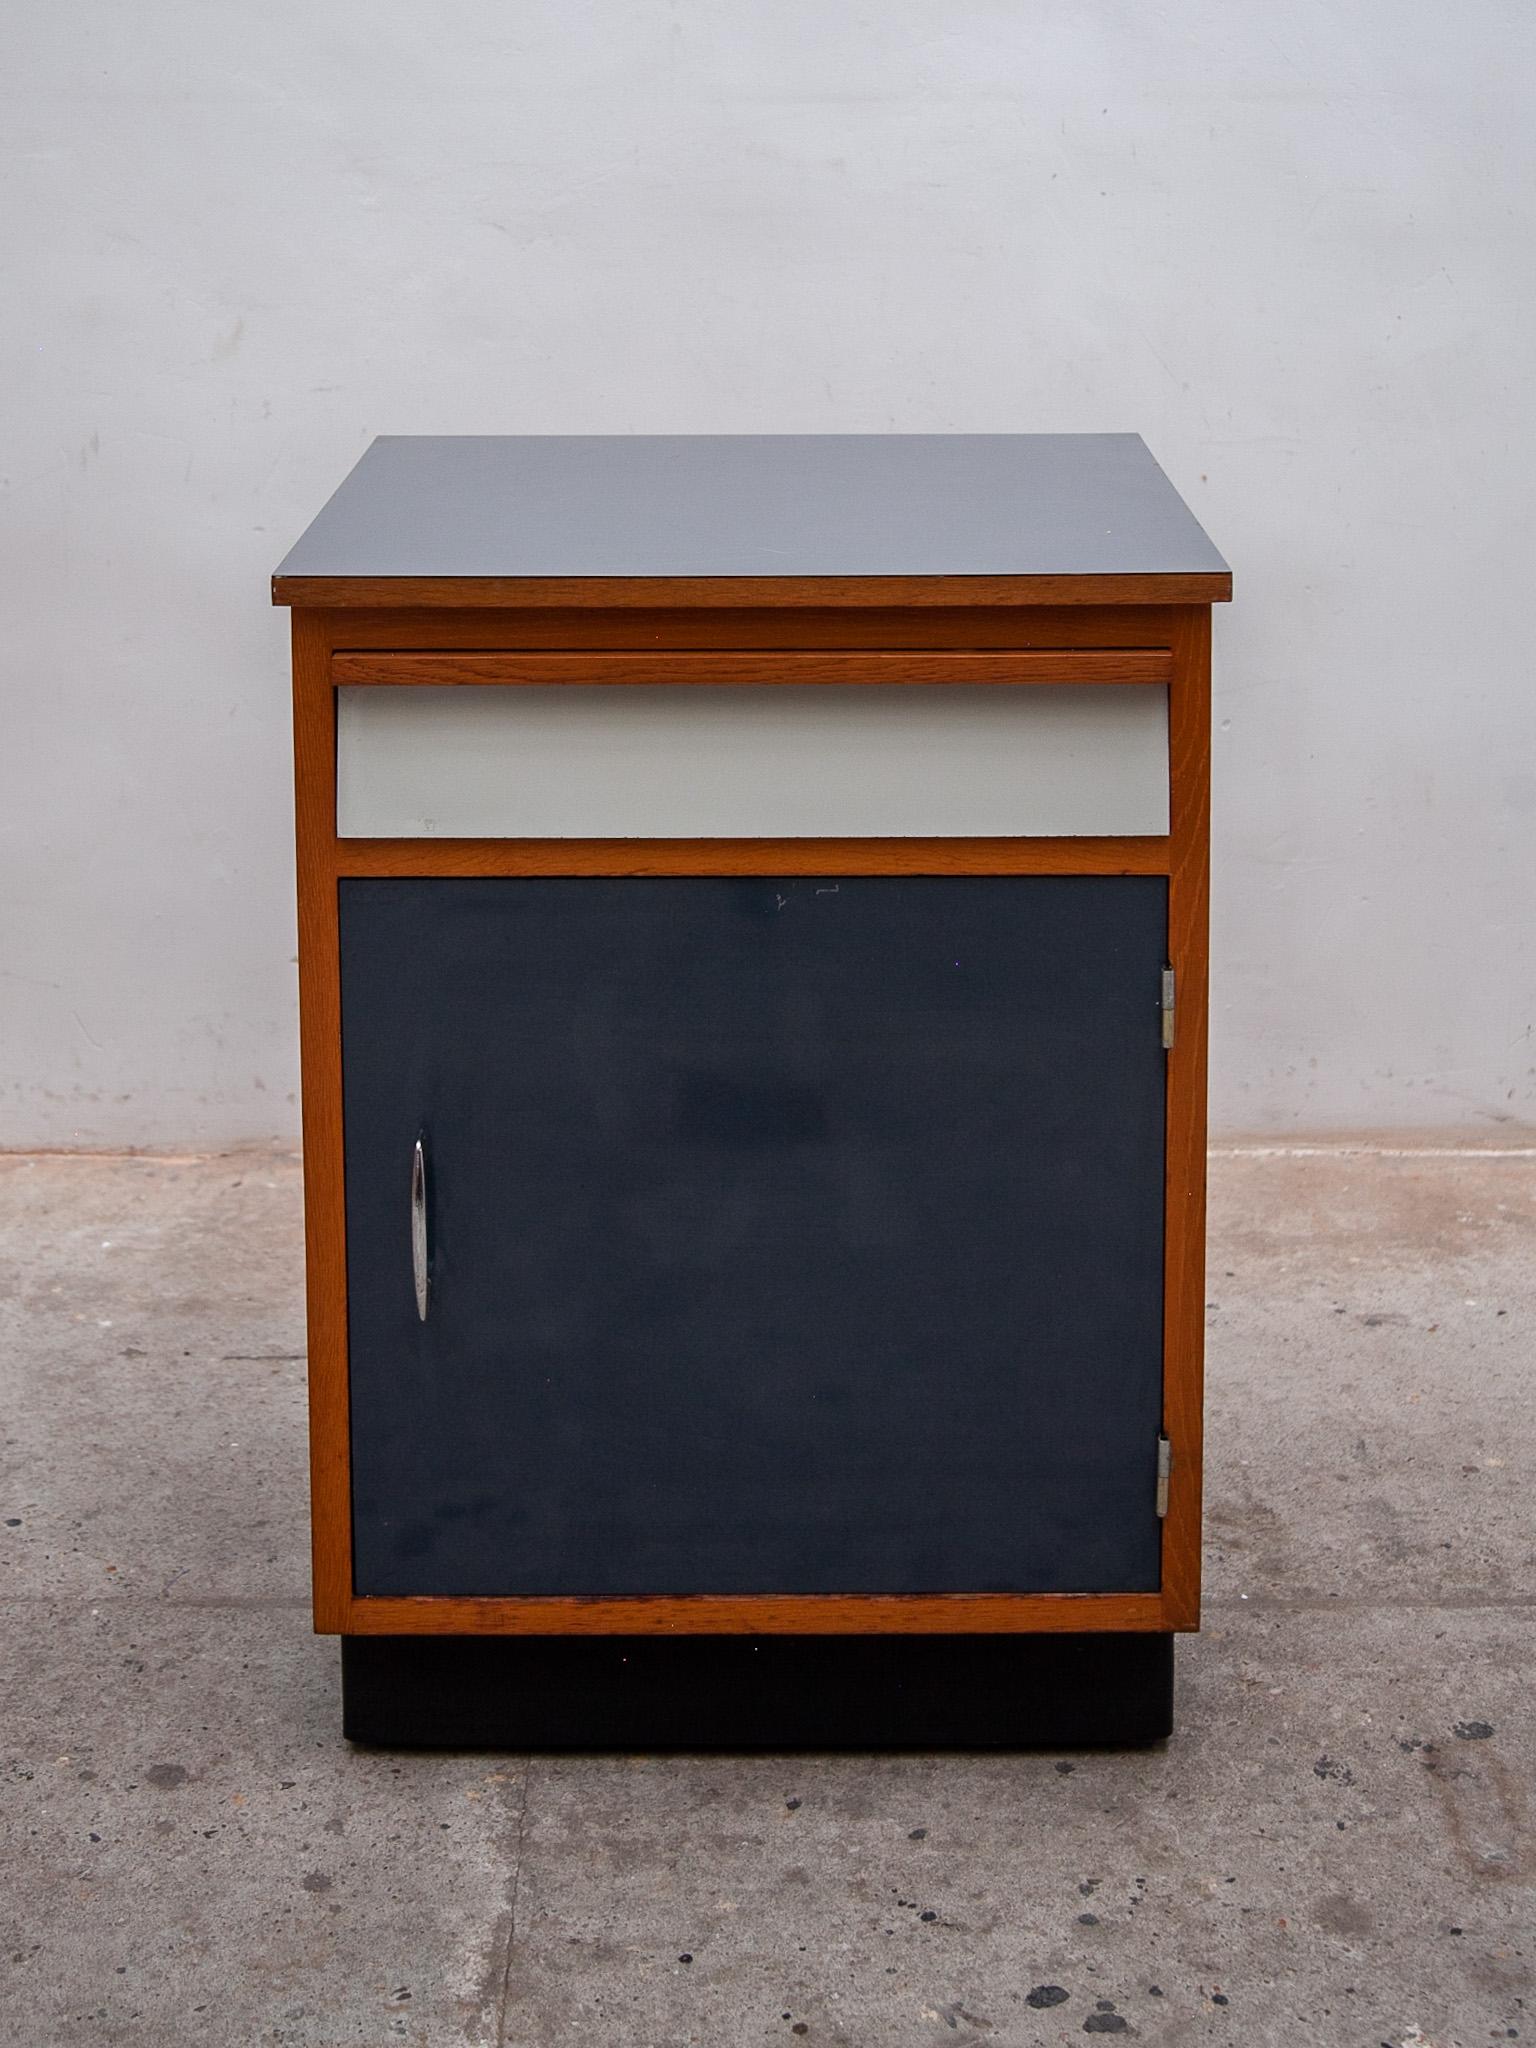 Rare industrial small sideboard with blue laminated formica door, one white laminated drawer and a gray laminated top, the sideboard construction is in solid beech designed by Tubax, Belgium 1958. This typical fifties industrial sideboard has a very